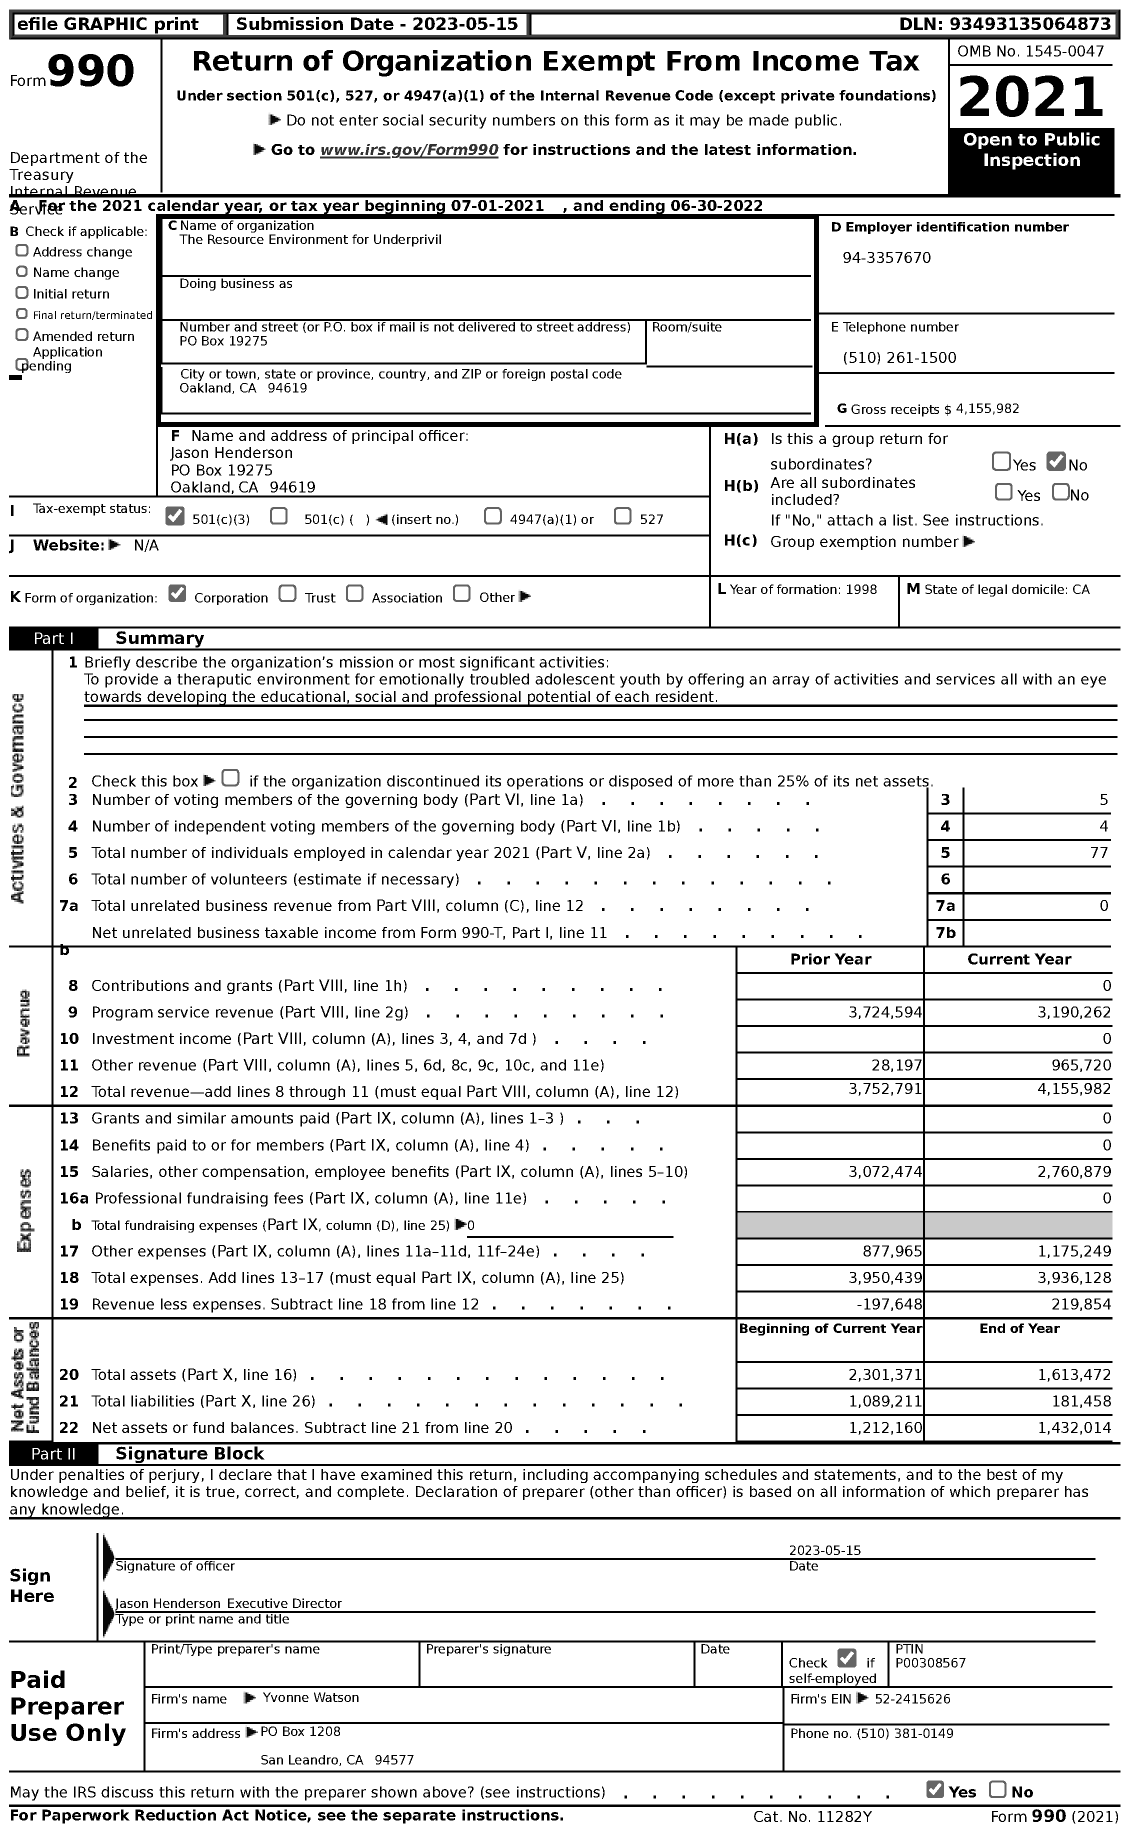 Image of first page of 2021 Form 990 for The Resource Environment for Underprivileged (REFUGE)